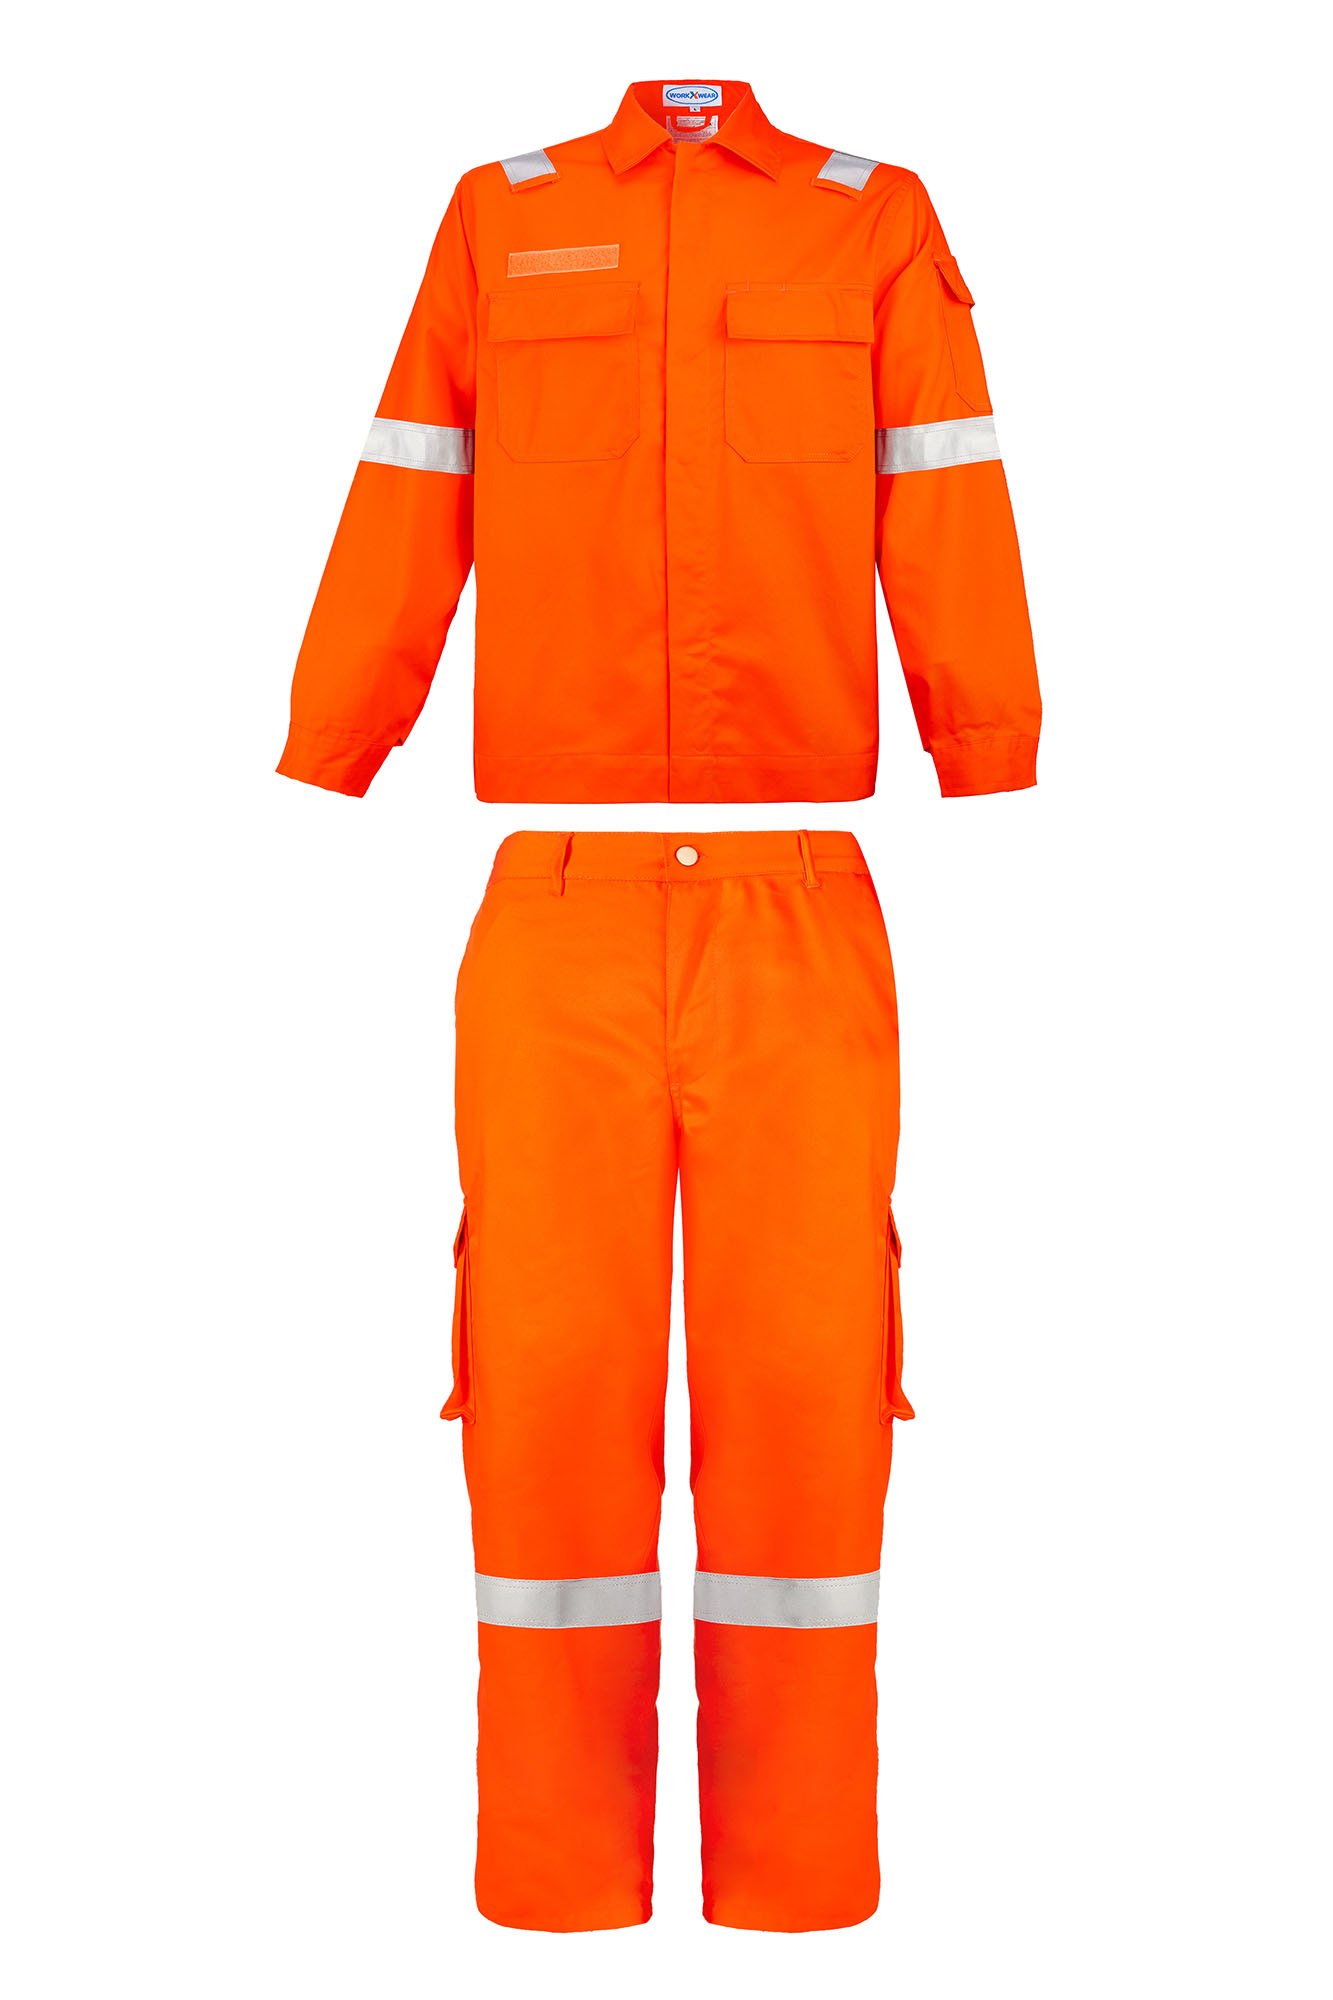 New 1000 Degree Thermal Radiation Heat Resistant Firefighter Uniform  Aluminized Aircraft Rescue Fire Fighting Approach Suit - AliExpress